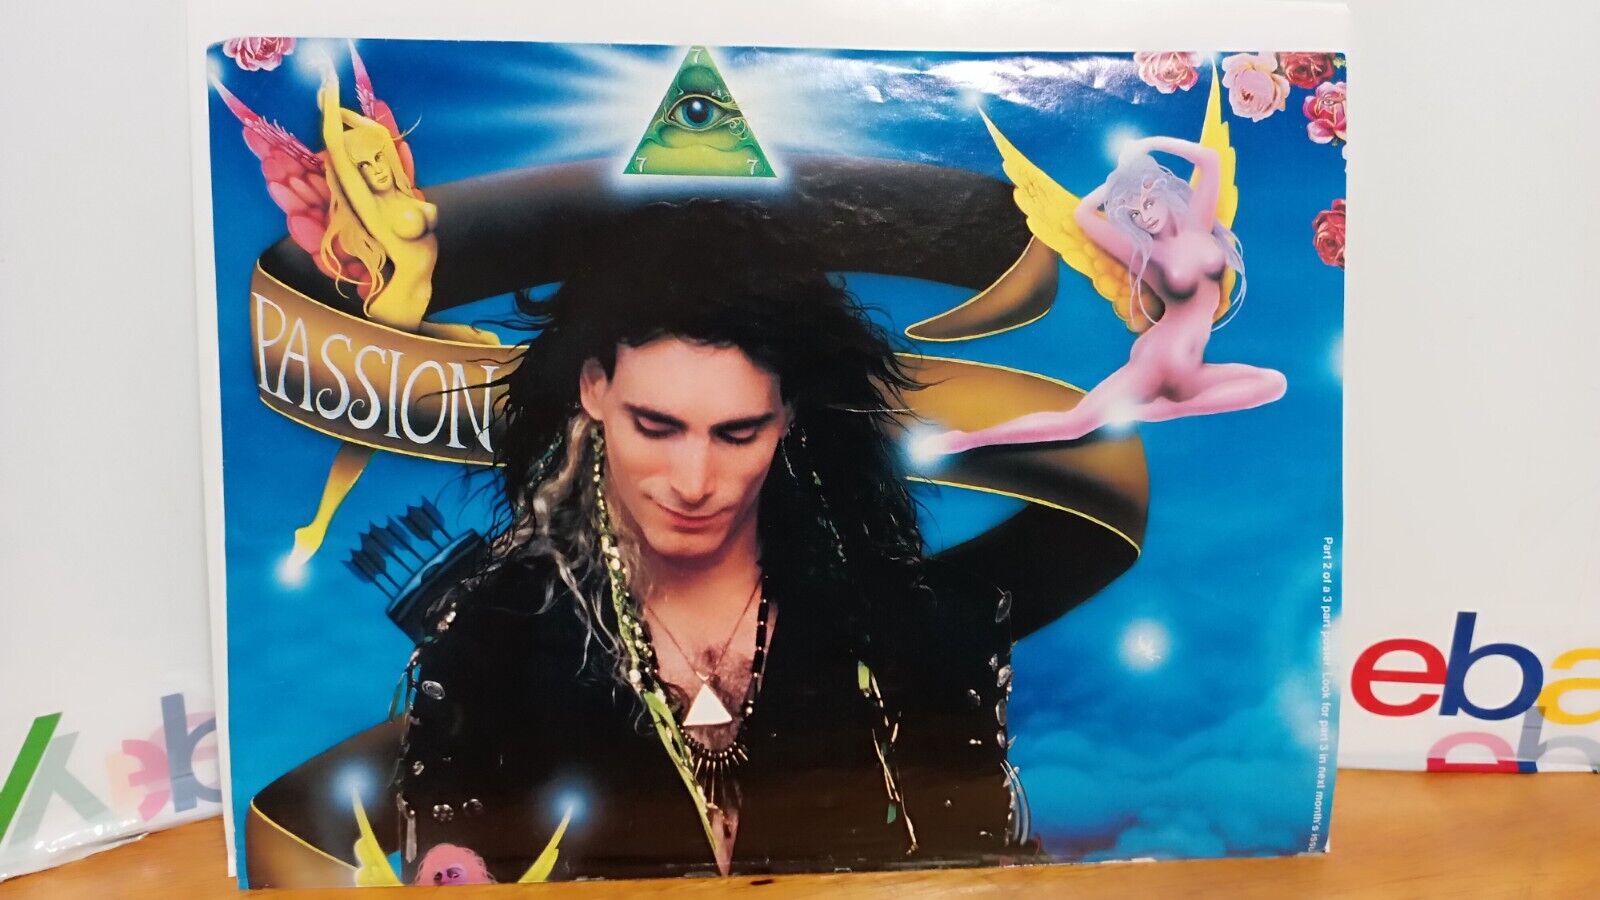 STEVE VAI PASSION AND WARFARE POSTER PART 2 OF SERIES ORIGINAL  11 X 8.5  t3